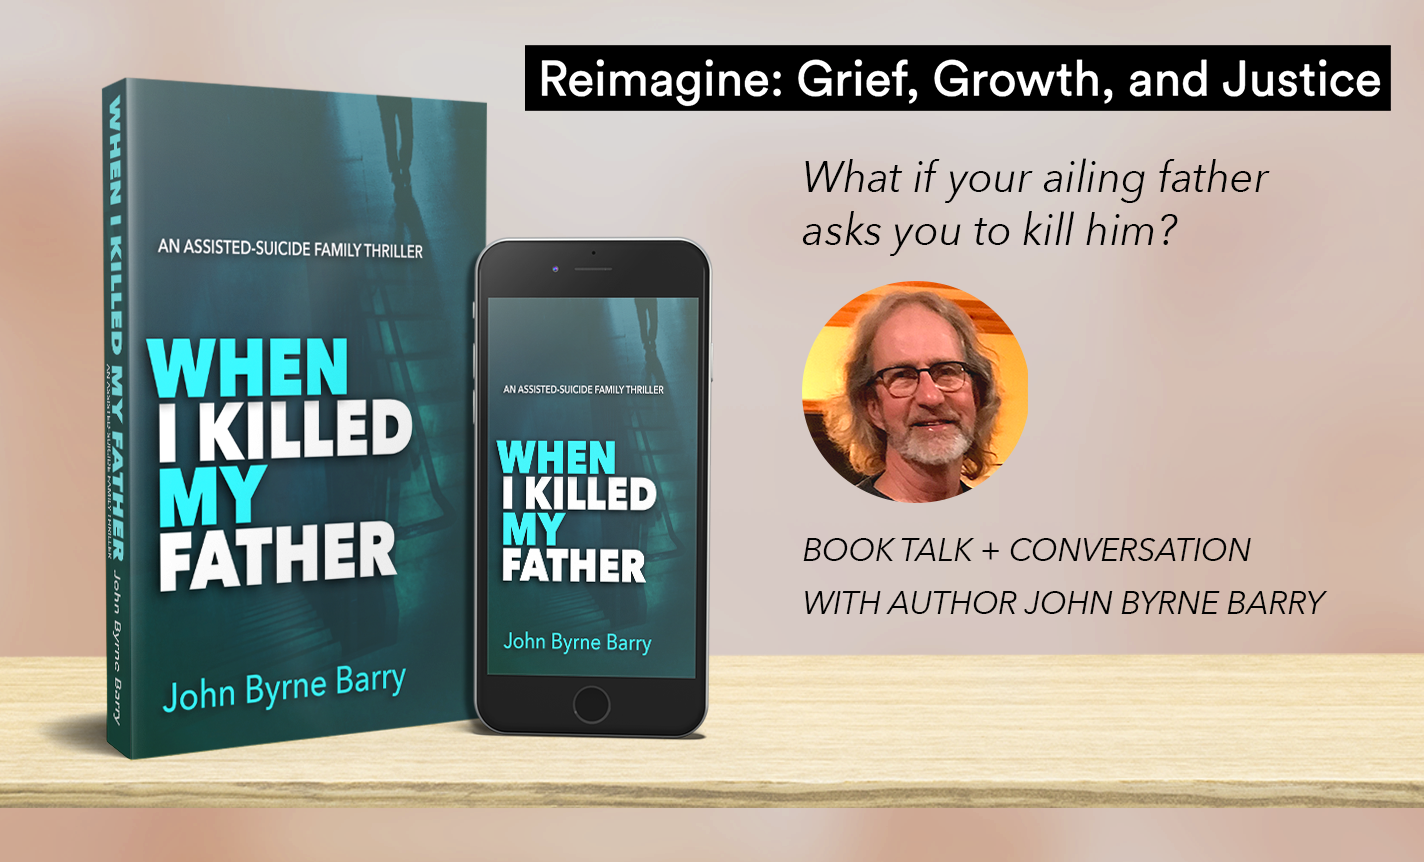 What If Your Ailing Father Asked You to Kill Him?